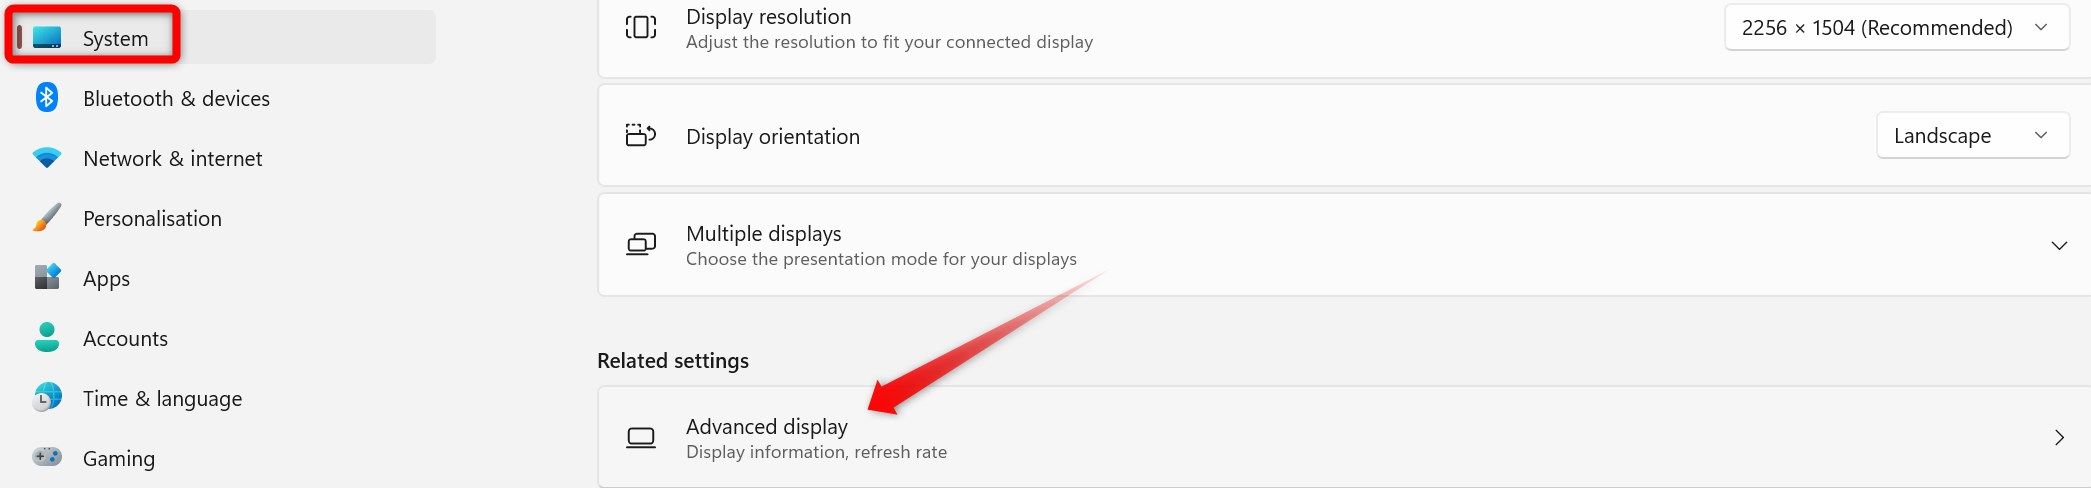 Opening the advanced display settings in the Windows settings app.